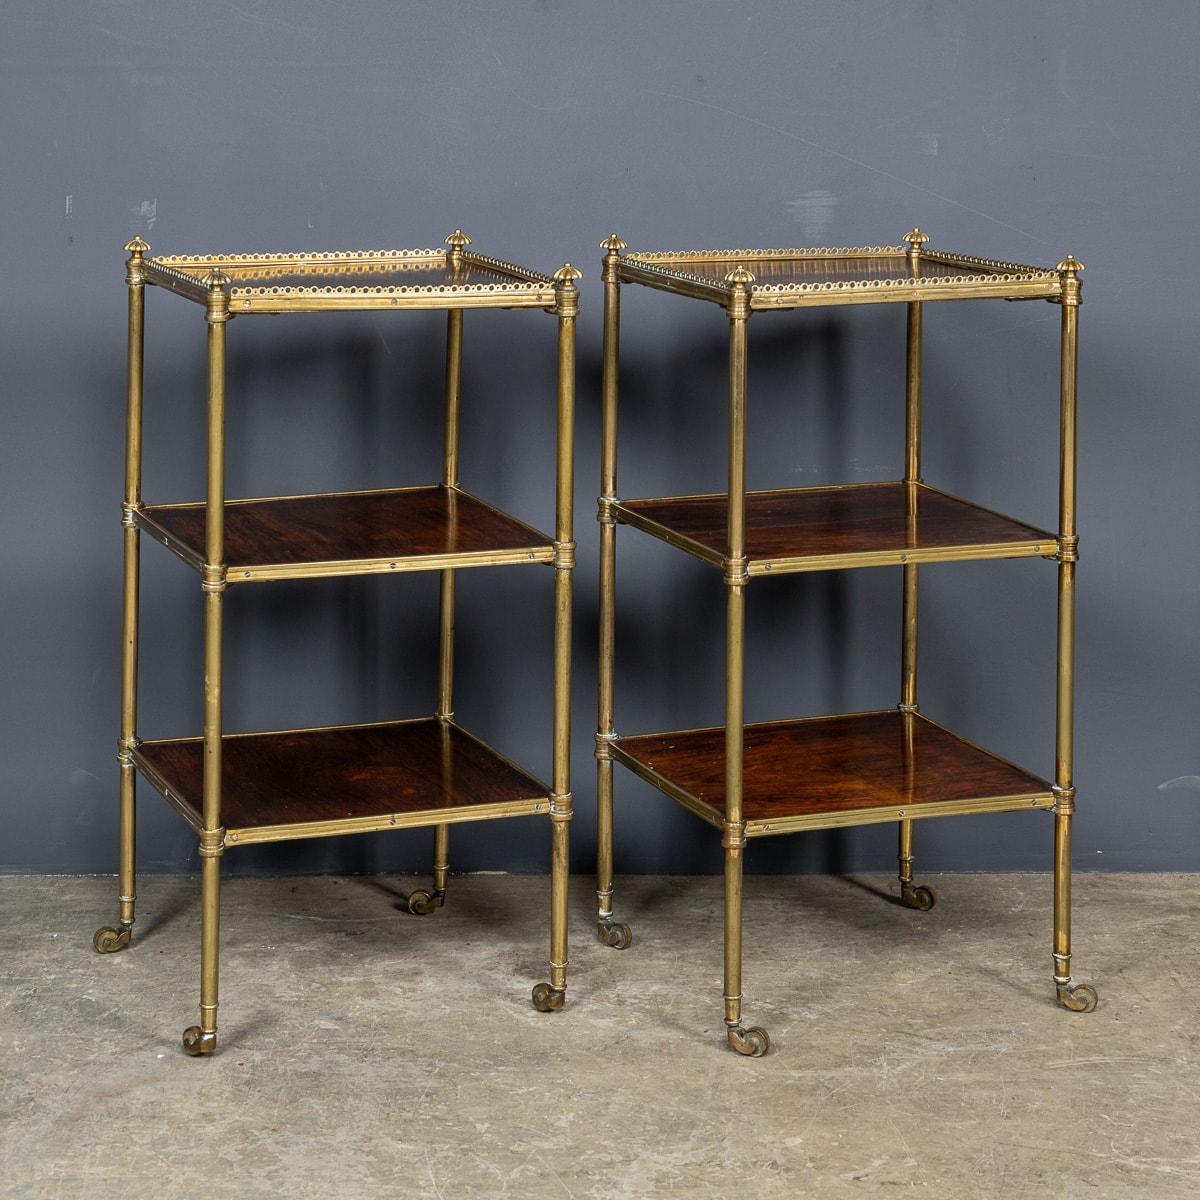 Antique 19th Century pair of Regency rosewood & brass etageres. This pair showcases a brass pierced upper gallery, harmonising with three tiers of square-shaped rosewood shelves, upheld by a tubular brass frame. Enhanced with cast roller wheels,